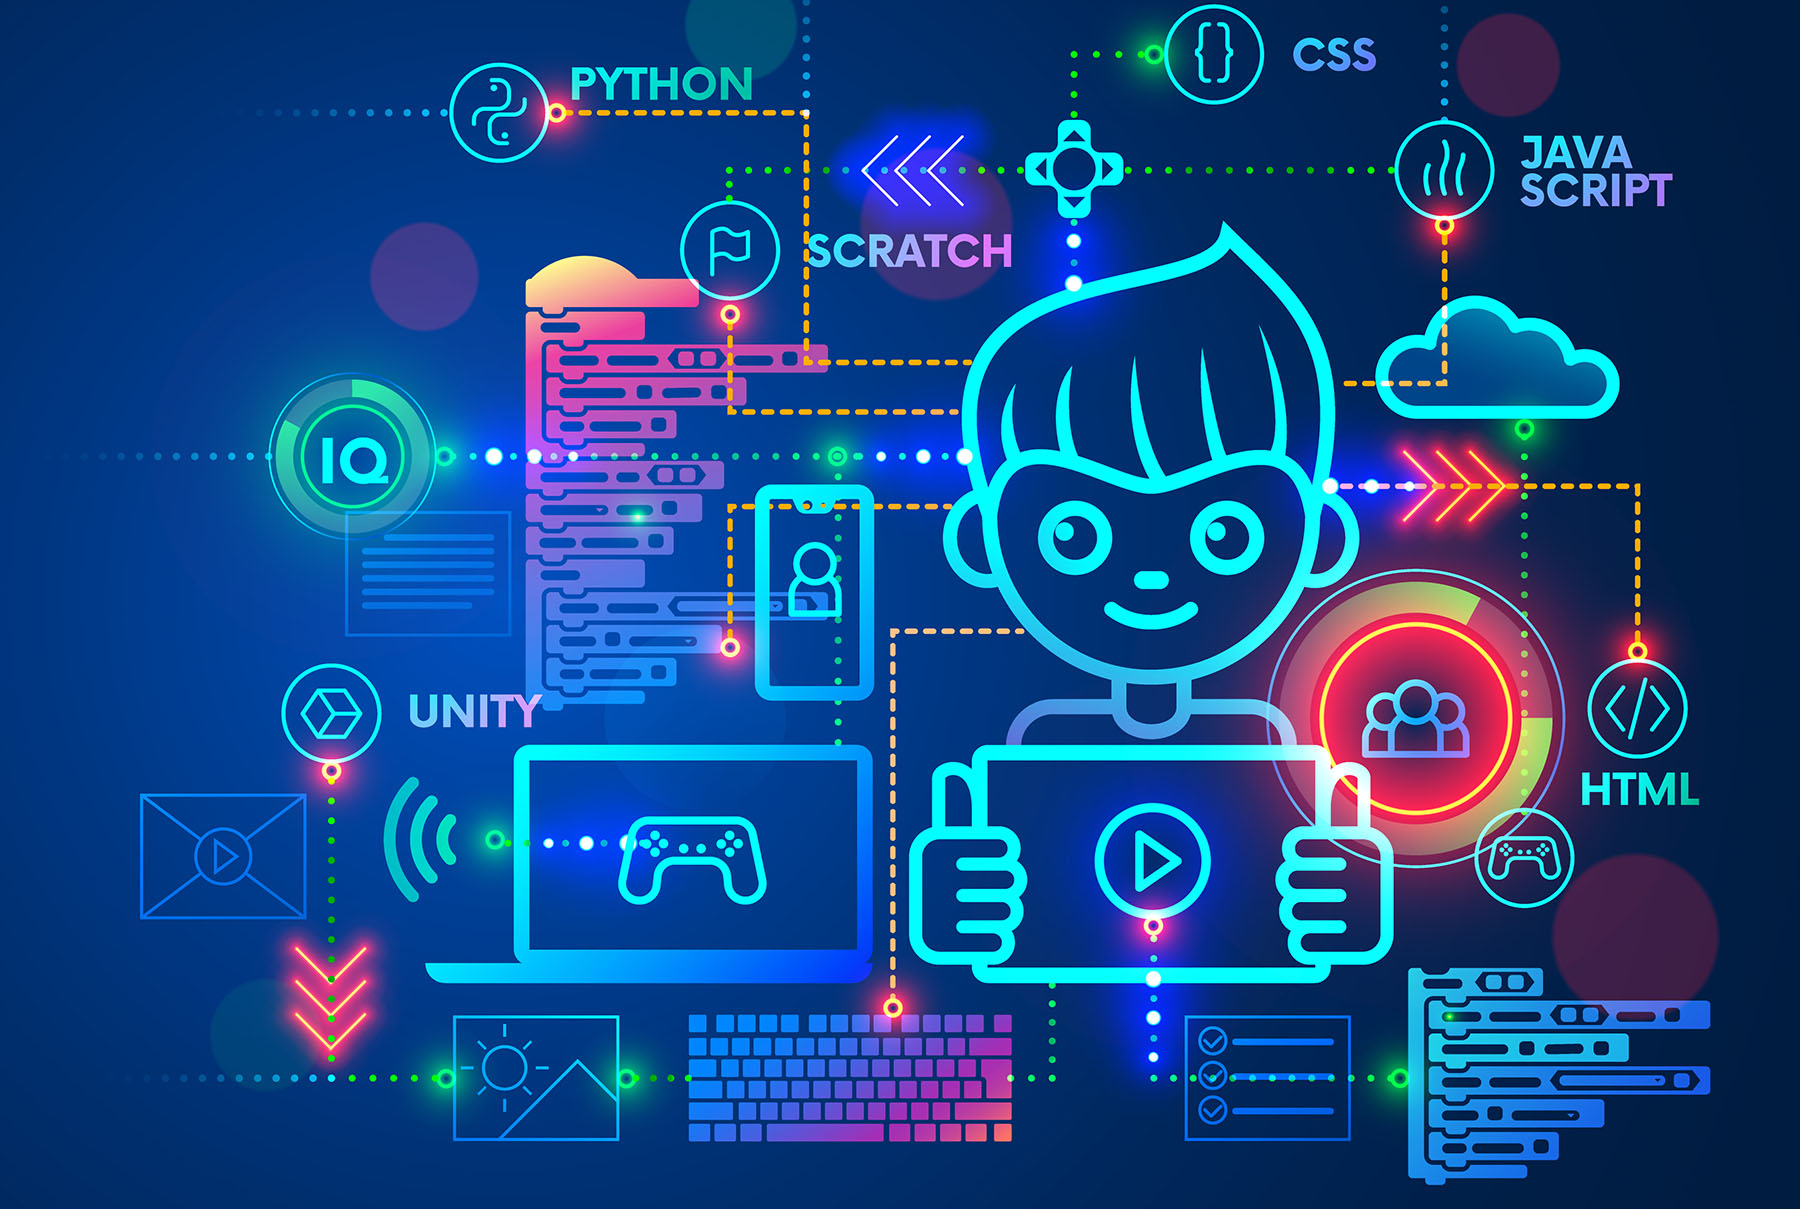 clip art image of boy and coding languages in blue tones